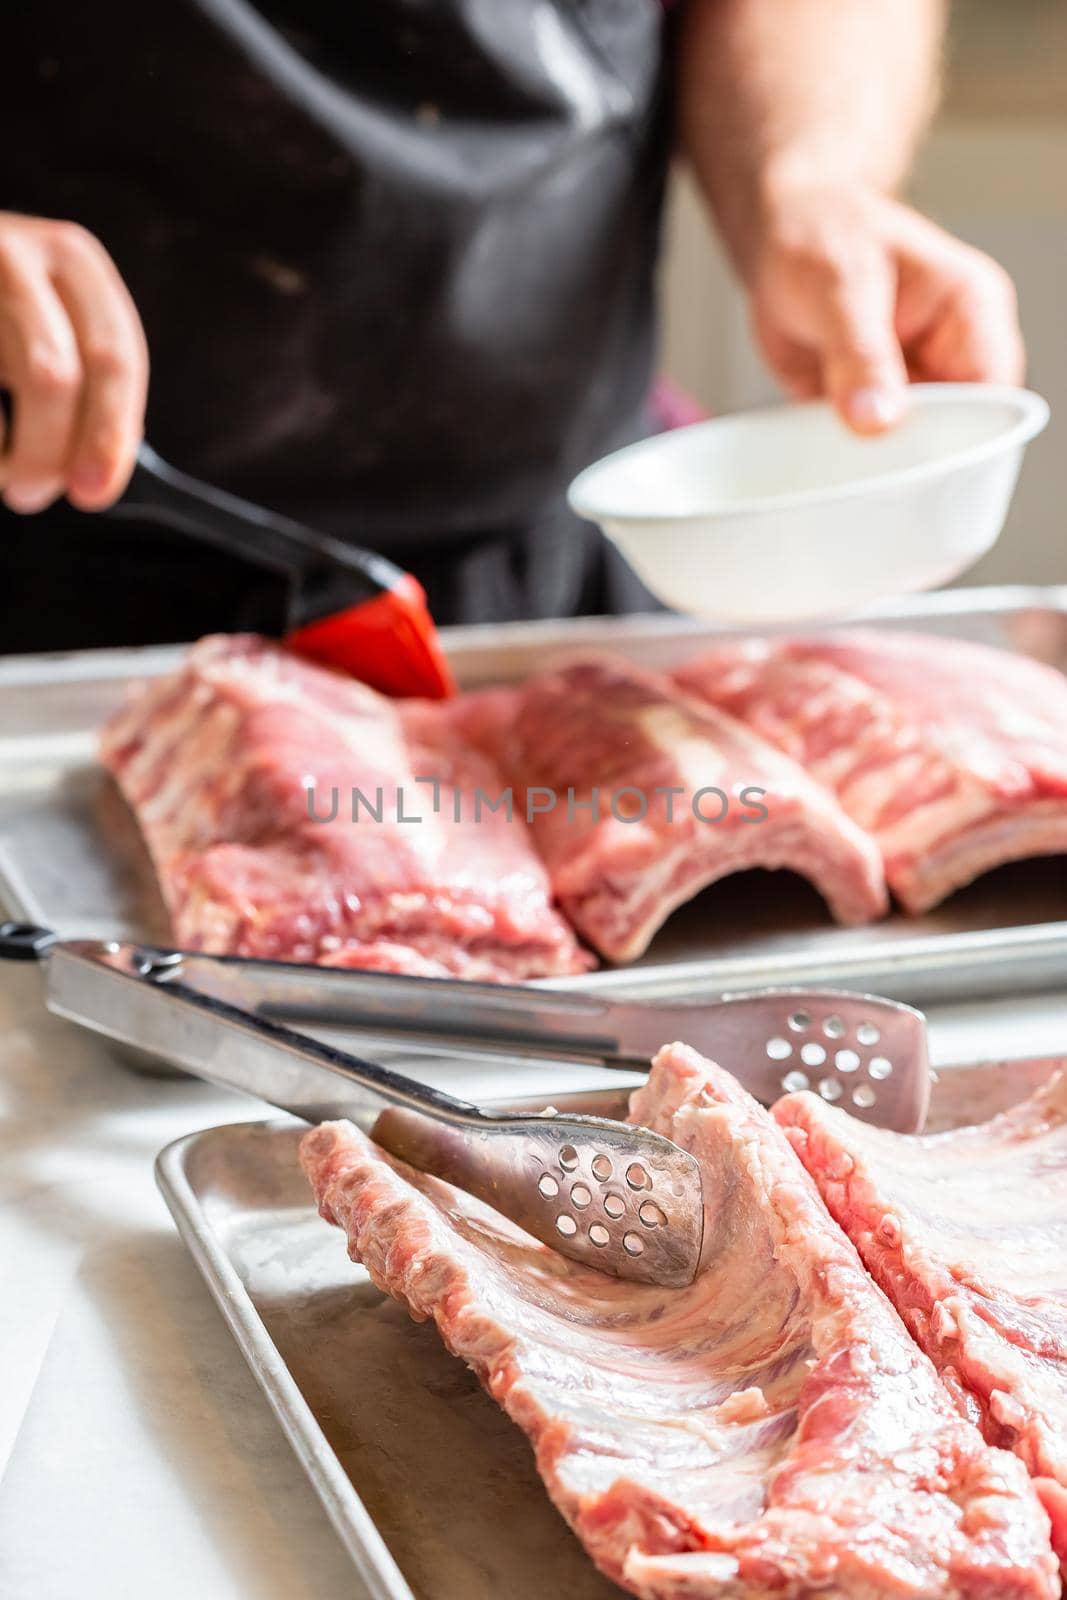 Chef brushing raw beef ribs with marinade. Male cook hands preparing meat for BBQ grilling.